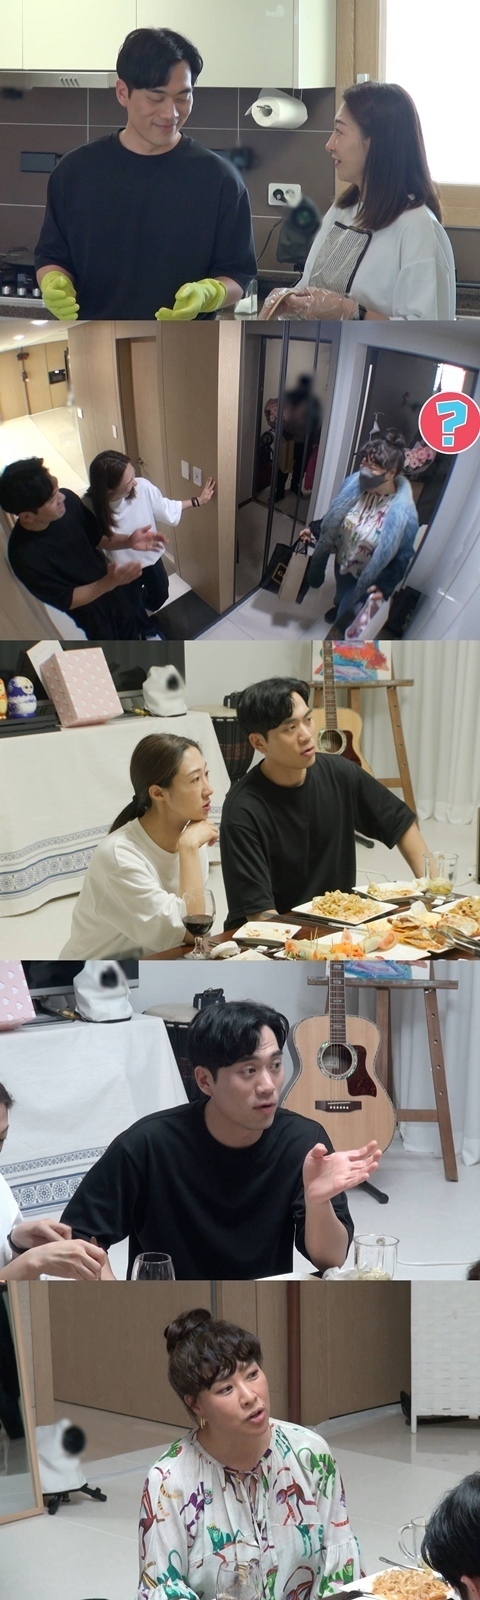 Sak Ahn Chang-hwan reunites with the drama Fever Blood Priest members.On January 31, at 10:30 pm, SBS Same Bed, Different Dreams 22 - You are My Destiny (hereinafter You are My Destiny), the meeting between Ahn Chang-hwan Jang hee-jung and the drama Fever Death members will be revealed.The Ahn Chang-hwan jang hee-jung couple invited the drama Fever Priest team, which Ahn Chang-hwan played as Sak, to their home.As they raised their curiosity about which members would come, the members who arrived at the end of everyones expectations boasted a loud low-world tension from the appearance.They also poured out a surprise revelation for Ahn Chang-hwan.The members laughed at the episode, saying, I thought Ahn Chang-hwan was a real Thai.On the other hand, actor Jung Young-joo, one of the invited members, attracted attention by saying that there was a marriage society, celebration, and weekly experience.Chung Young-joo also promised to officiate to the members of the Hypervascular Priest who came together and received cheers from everyone.Chung Young-joo, Ahn Chang-hwan jang hee-jung and a hot-blooded member who boasted of Steam Chemistry will be released on the air.